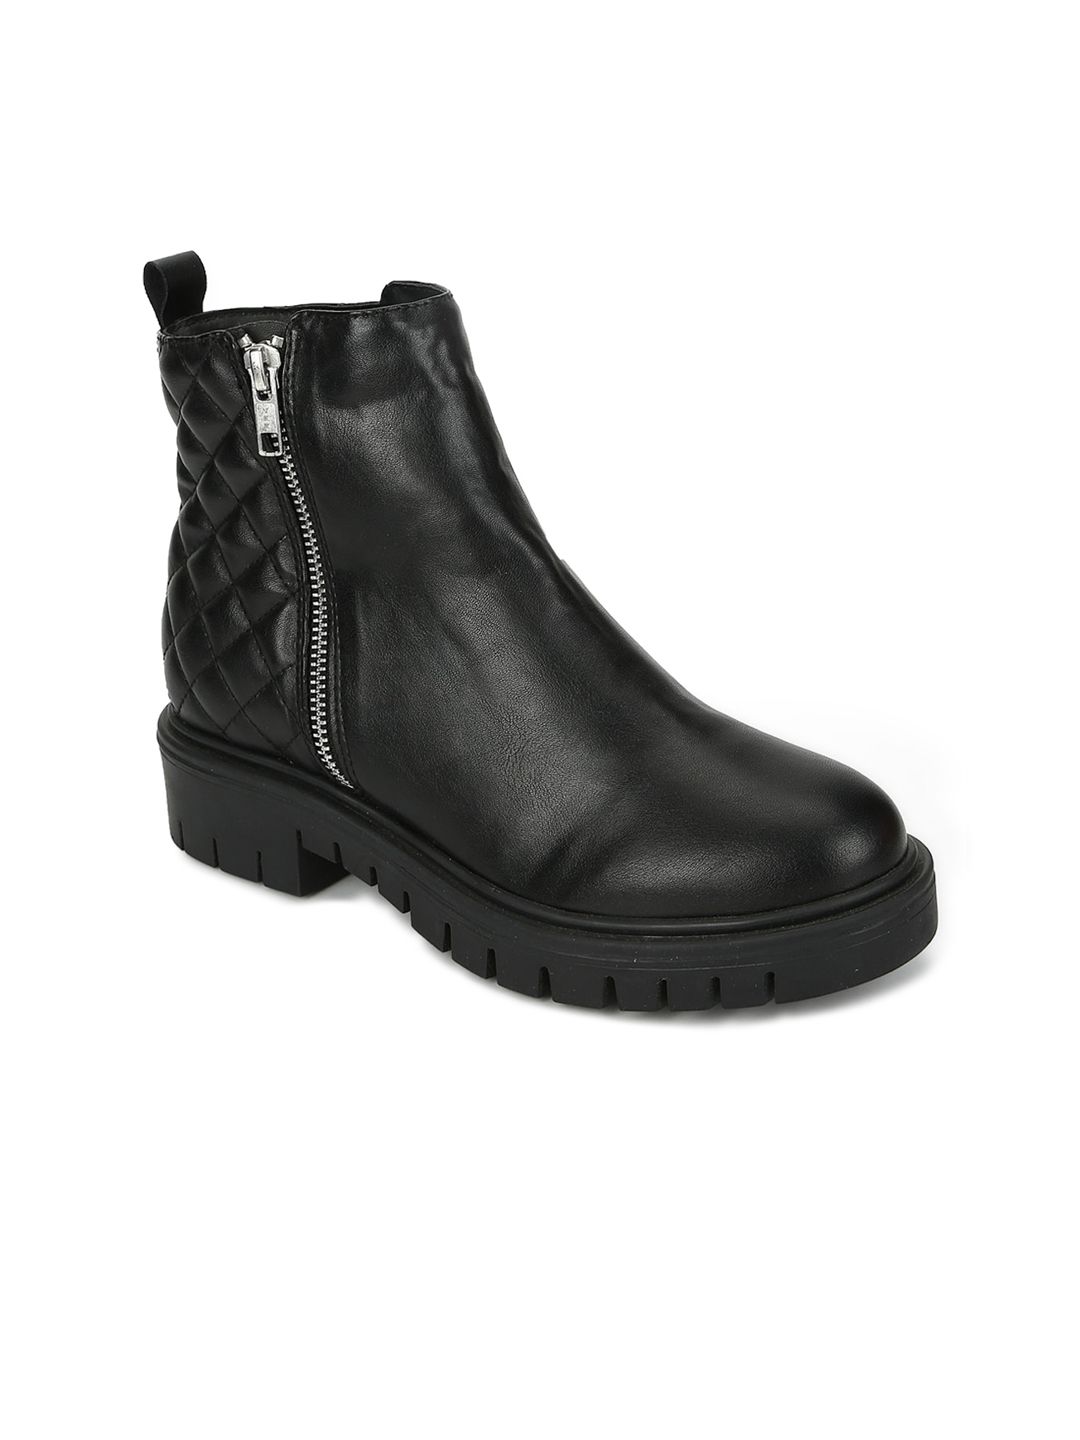 Truffle Collection Black PU Block Heeled Boots Price in India